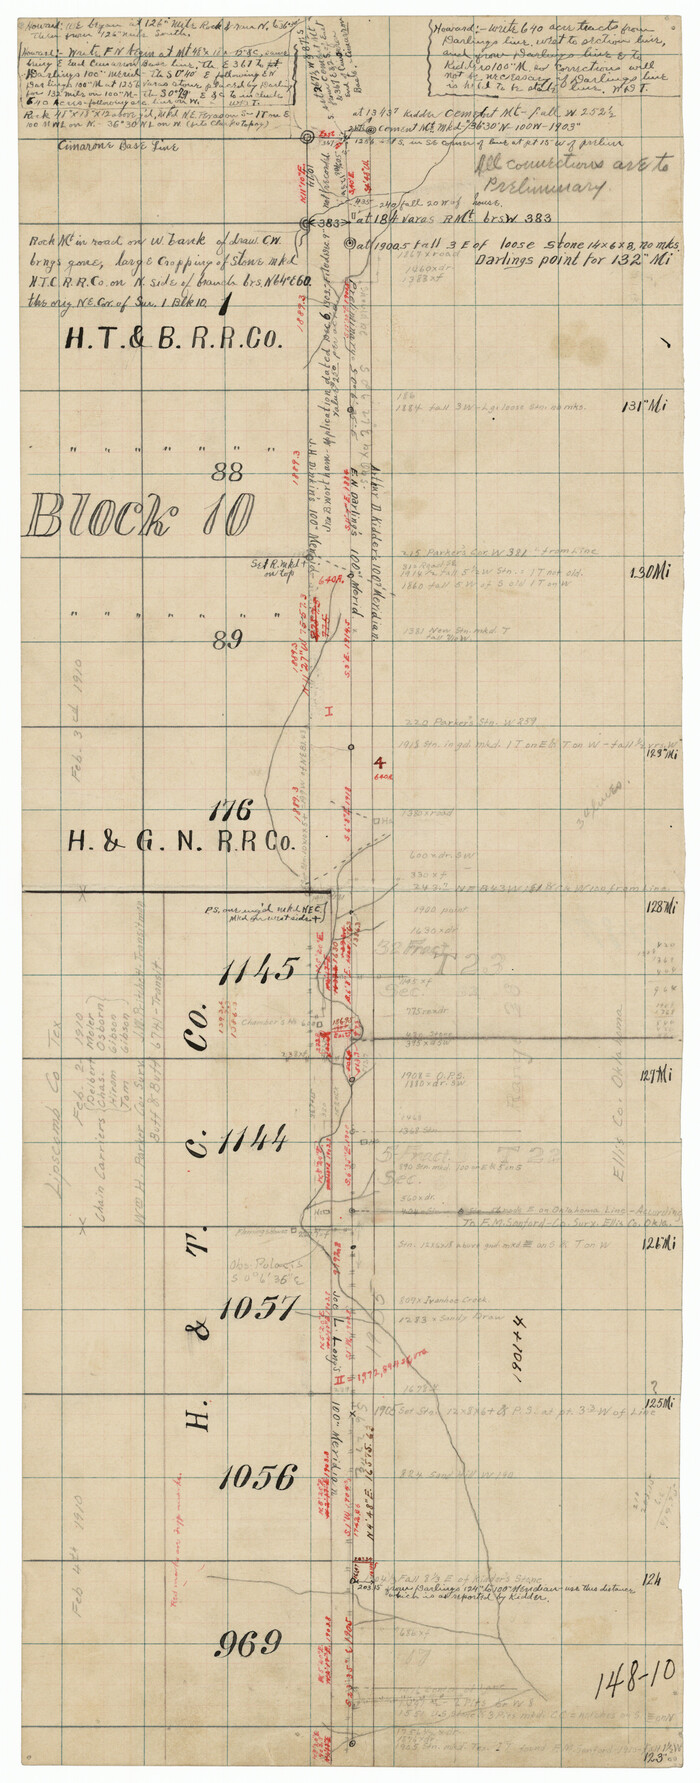 91317, East Line of Lipscomb County, Twichell Survey Records